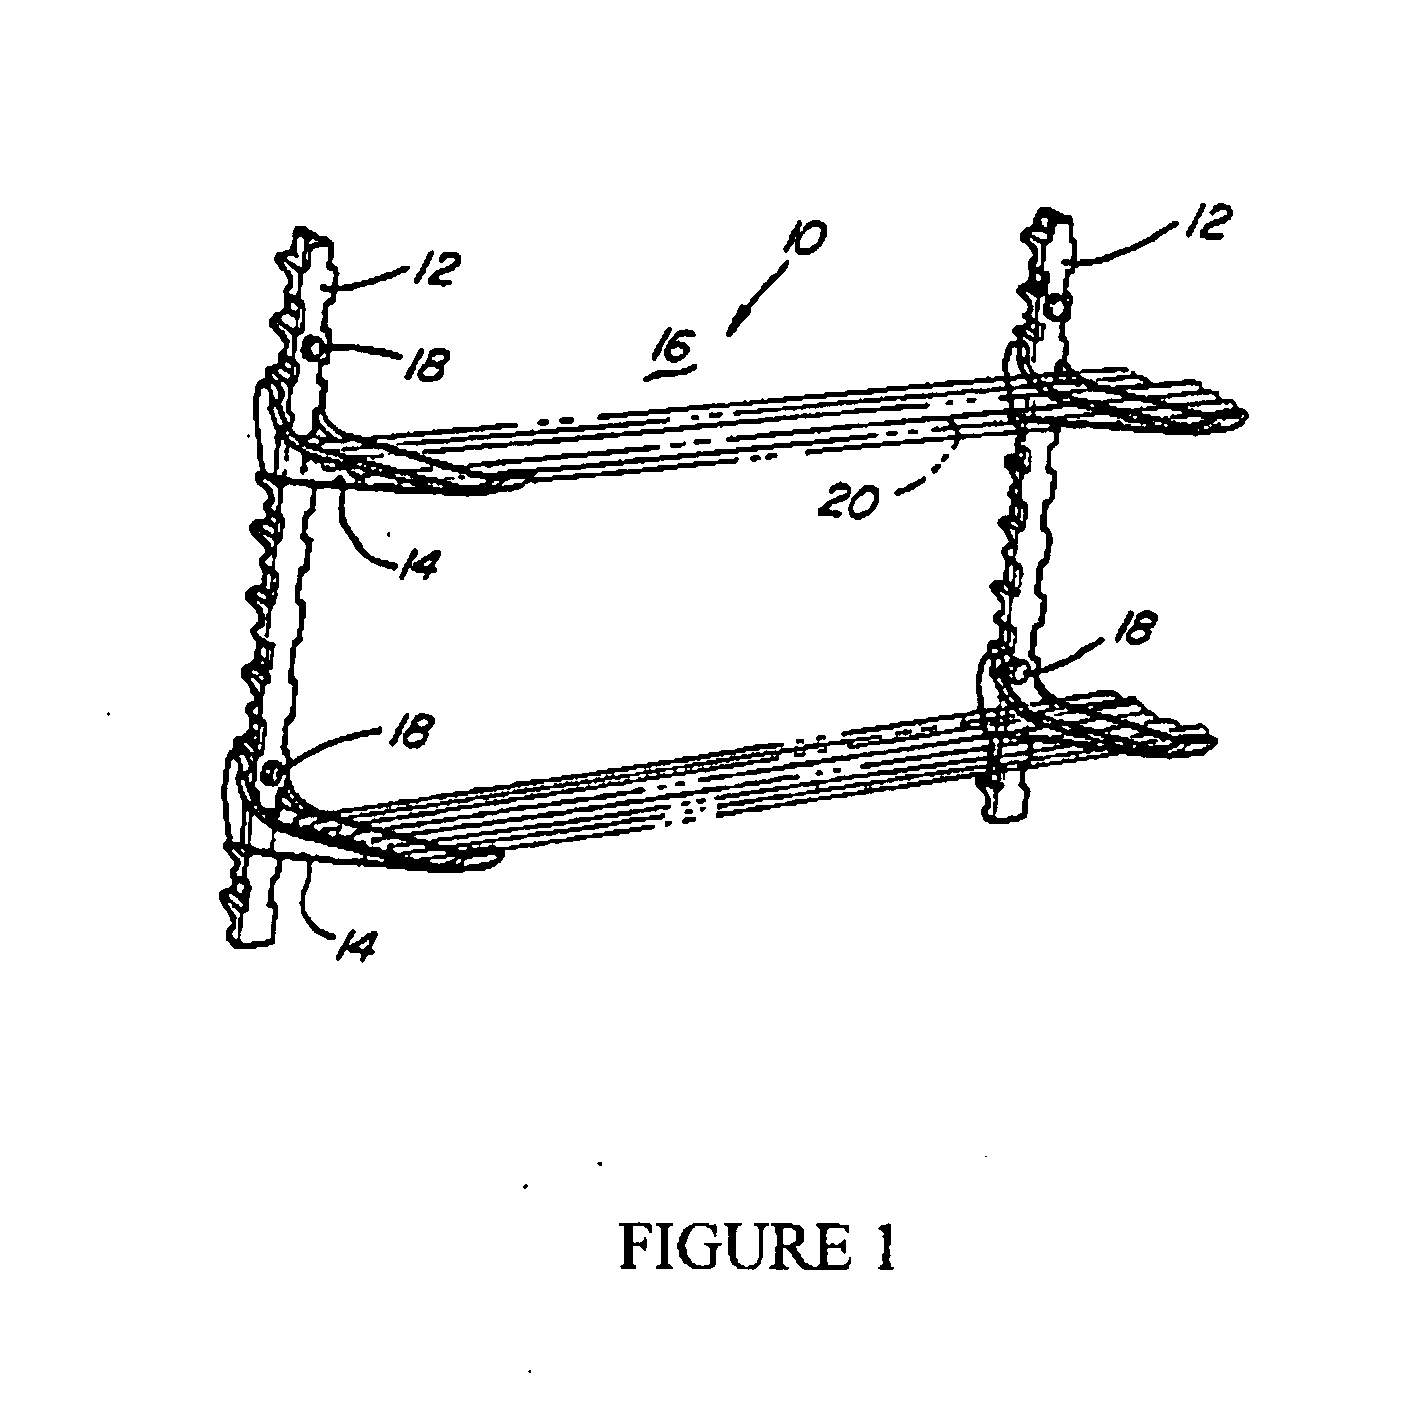 Apparatus and method for providing an insulated support rack